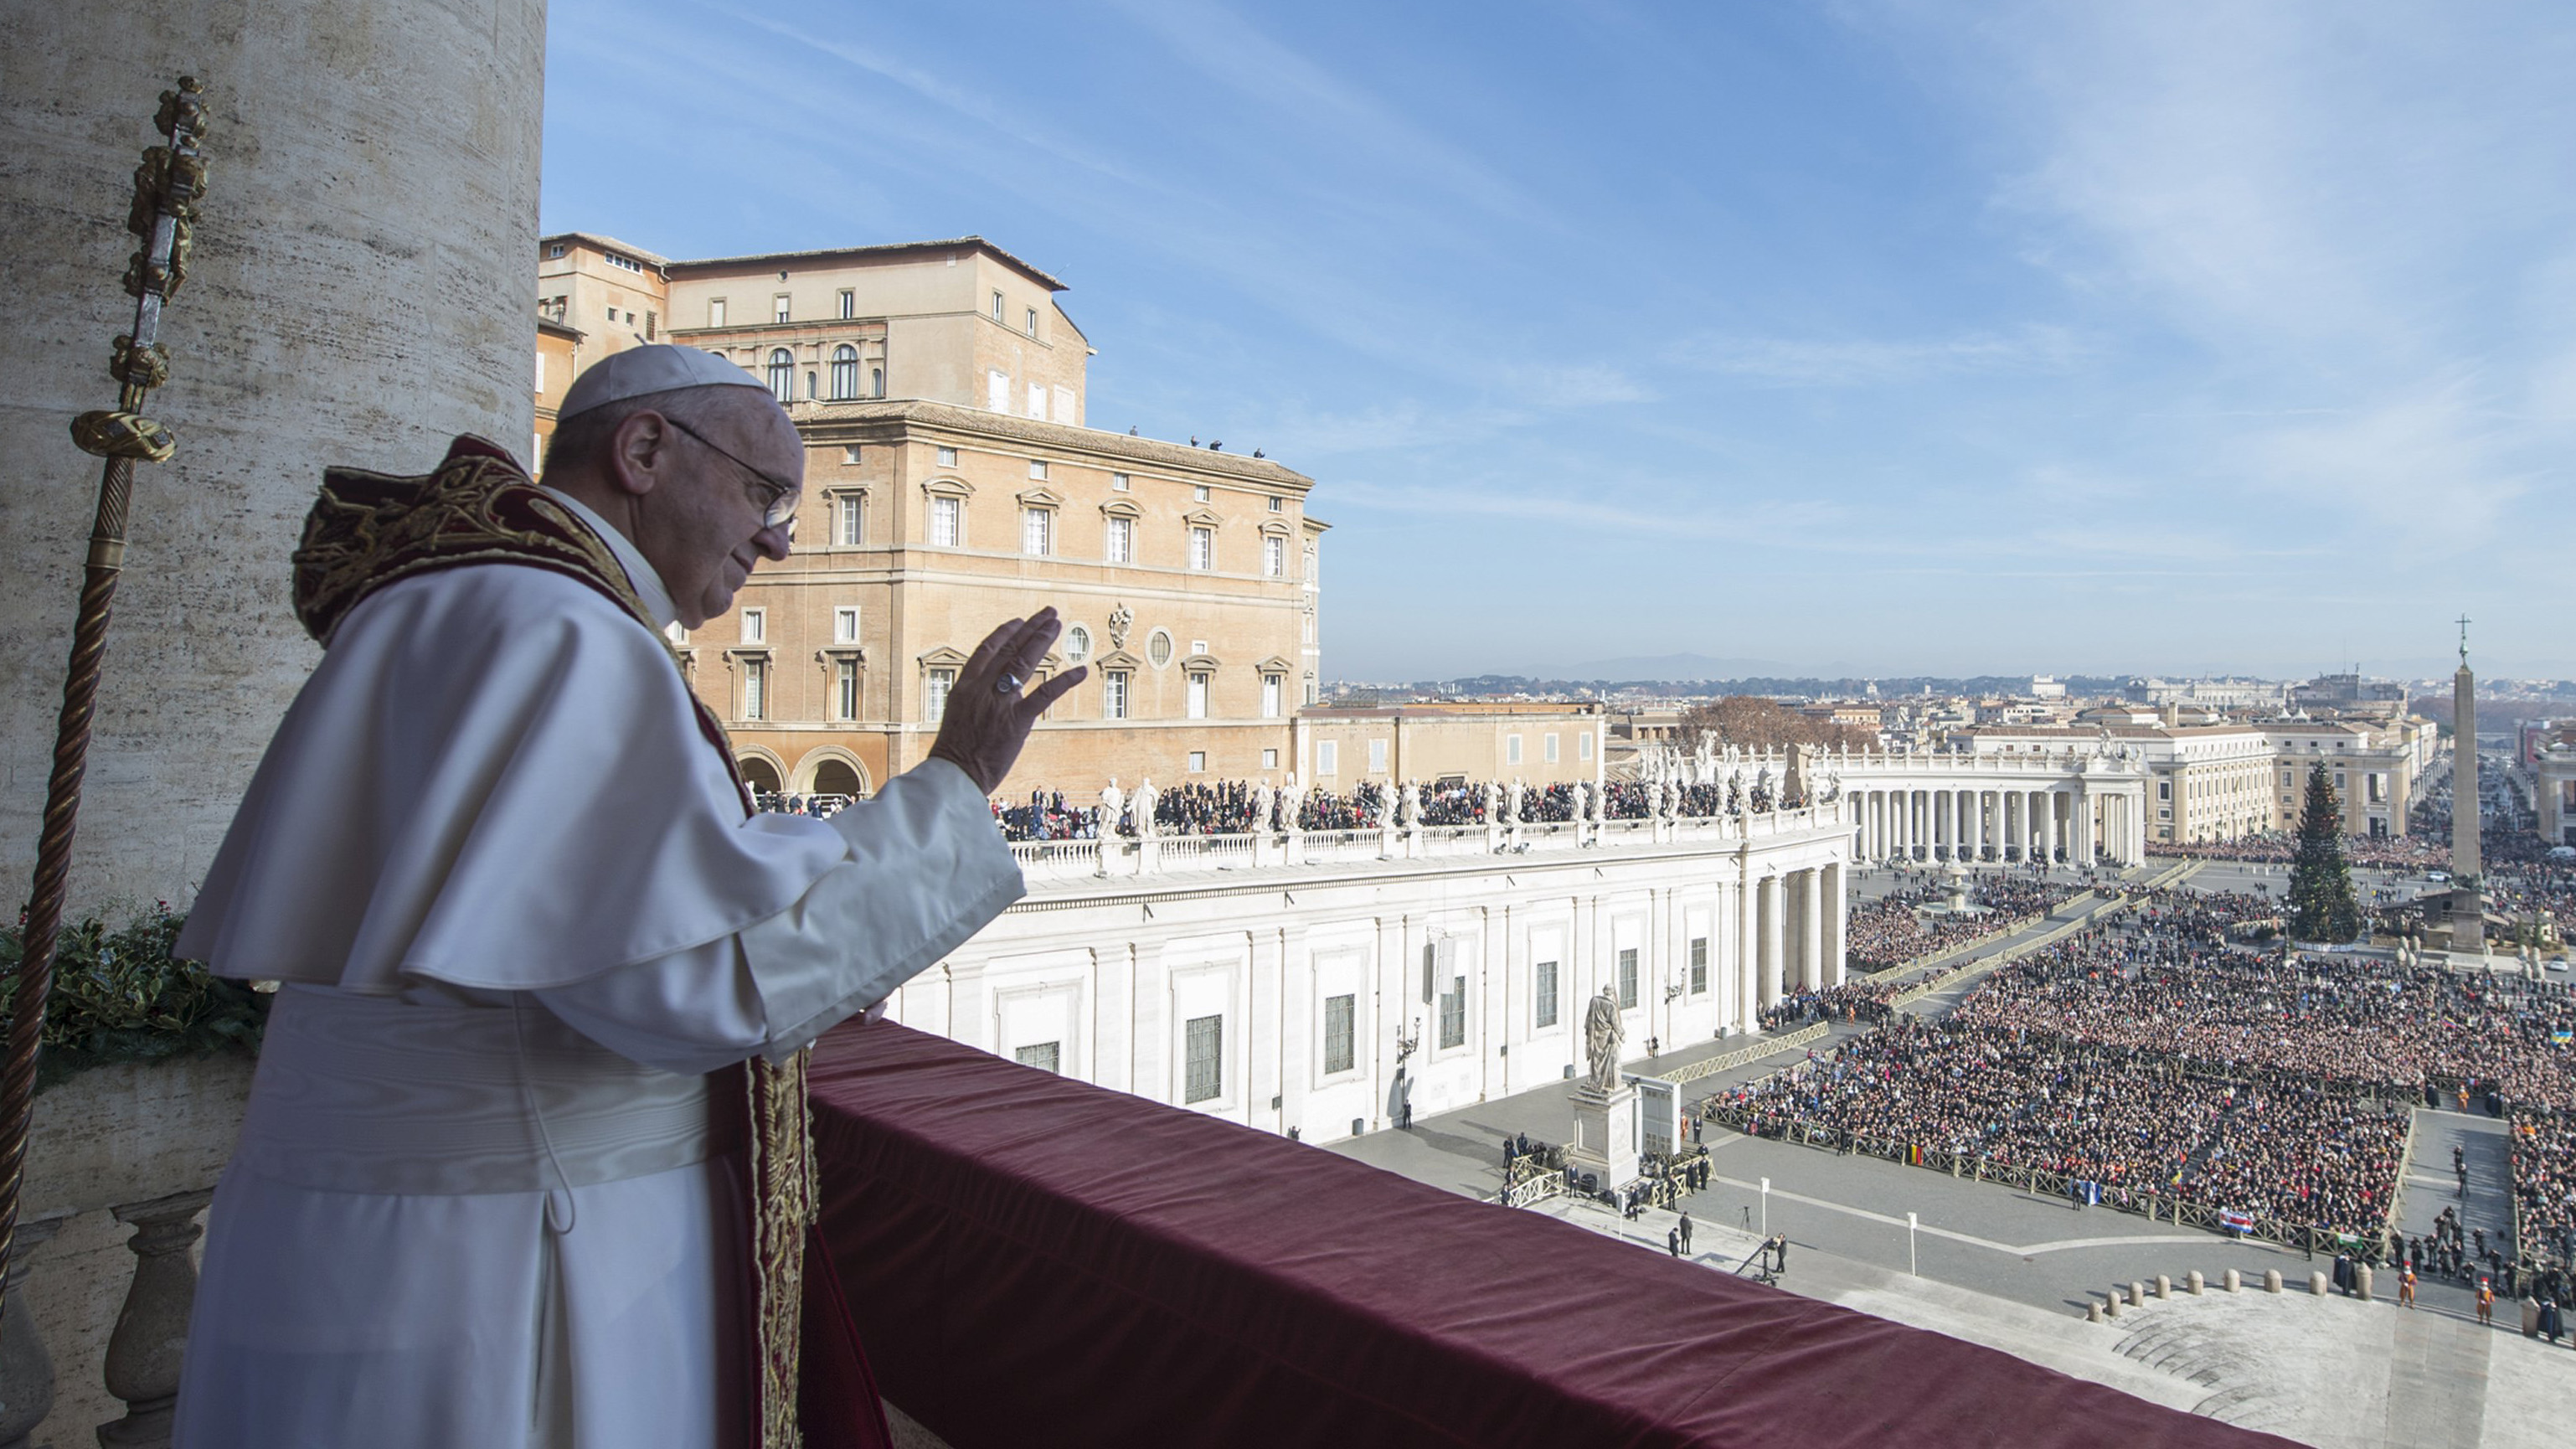 Pope Francis waves during the "Urbi et Orbi" (to the City and the World) Christmas message from the balcony overlooking St. Peter's Square at the Vatican December 25, 2015. вЂЁ REUTERS/Osservatore Romano/Handout via Reuters   TPX IMAGES OF THE DAY  ATTENTION EDITORS - THIS IMAGE WAS PROVIDED BY A THIRD PARTY. REUTERS IS UNABLE TO INDEPENDENTLY VERIFY THE AUTHENTICITY, CONTENT, LOCATION OR DATE OF THIS IMAGE. FOR EDITORIAL USE ONLY. NOT FOR SALE FOR MARKETING OR ADVERTISING CAMPAIGNS. FOR EDITORIAL USE ONLY. NO RESALES. NO ARCHIVE. THIS PICTURE IS DISTRIBUTED EXACTLY AS RECEIVED BY REUTERS, AS A SERVICE TO CLIENTS.